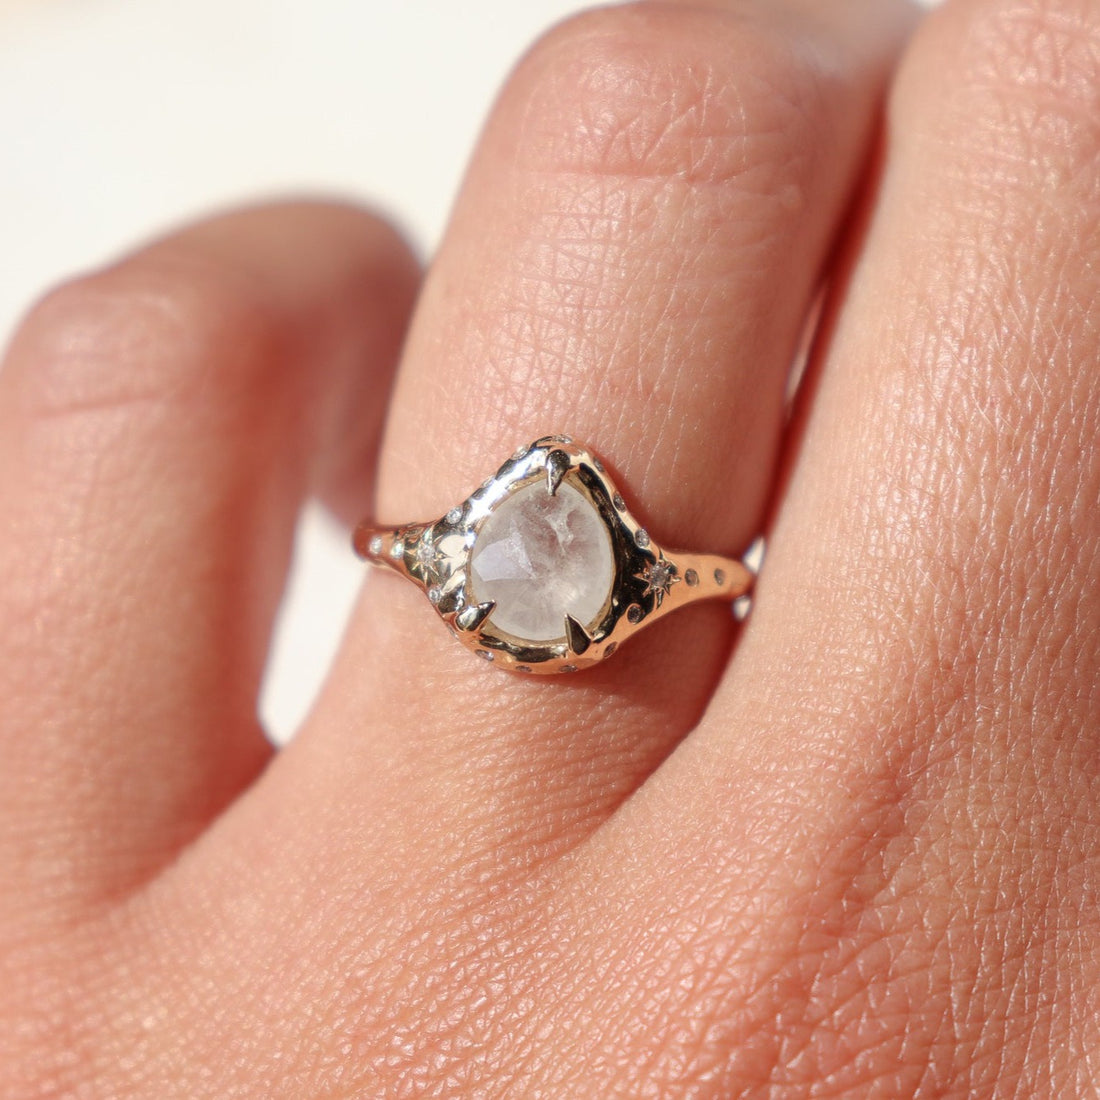 Close up of an icy diamond ring being worn on the ring finger